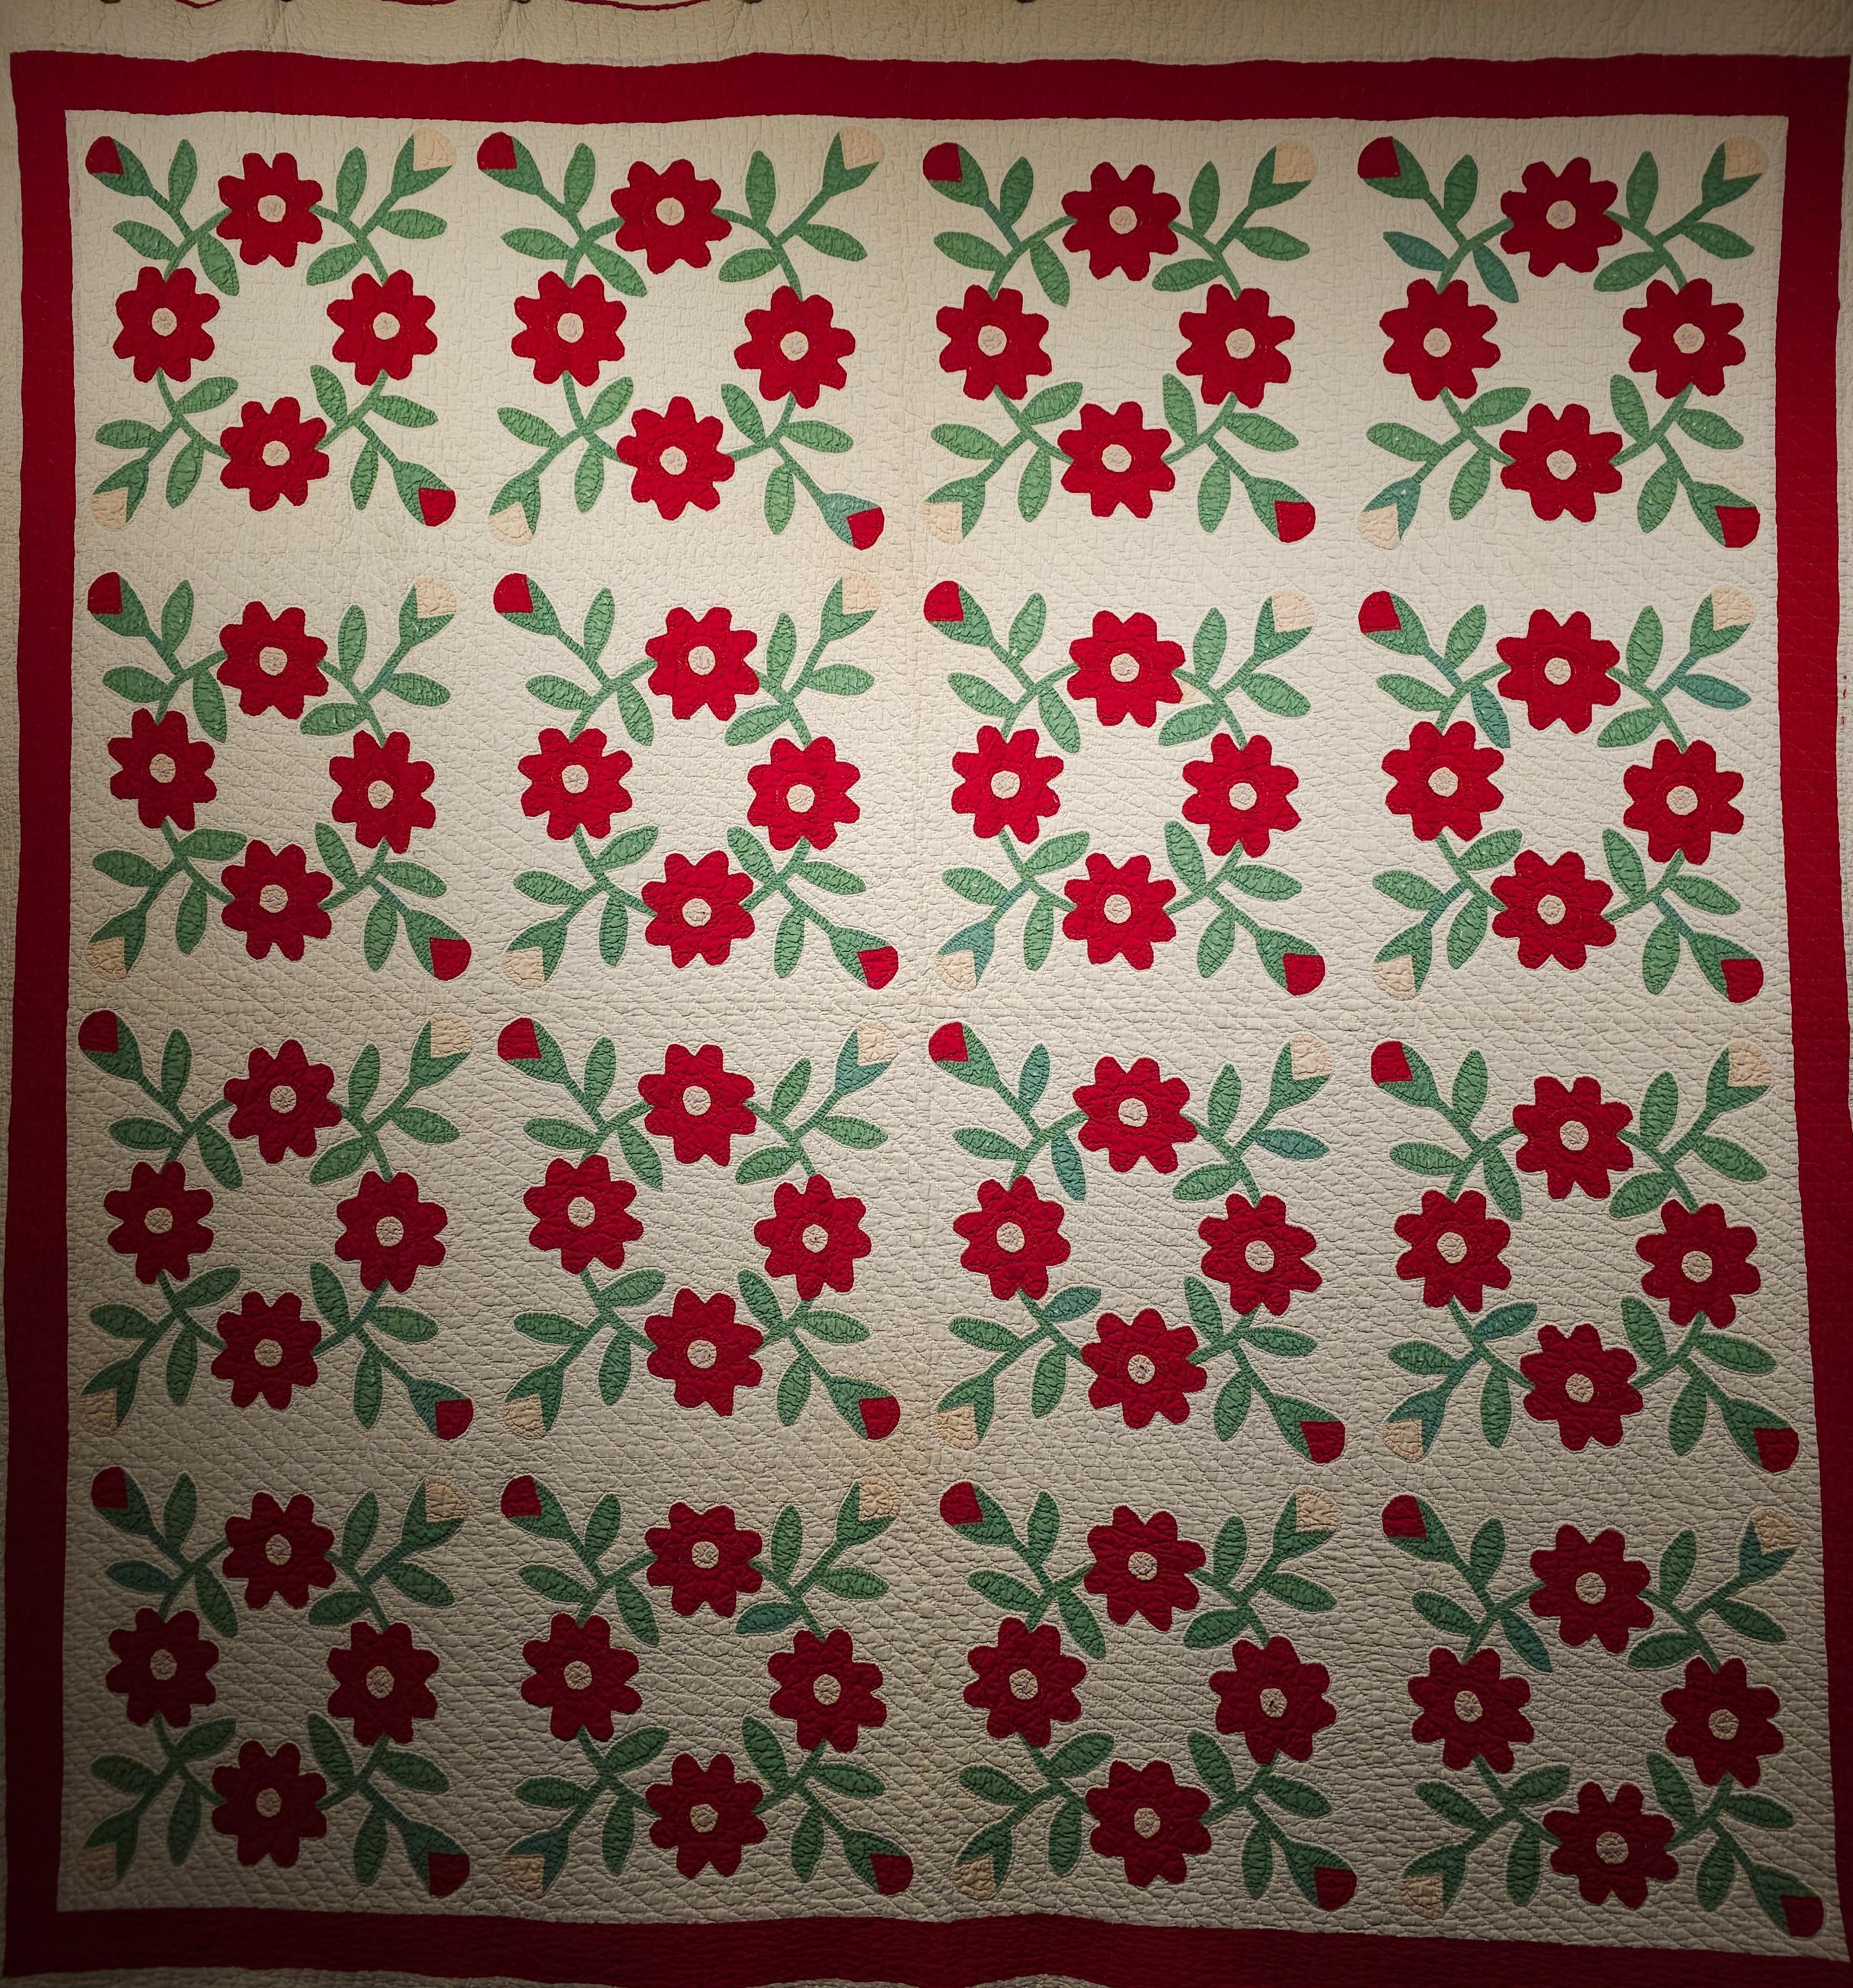 This beautiful American Applique Quilt was hand stitched in the late 1800s in Pennsylvania in the United States. The American Applique Quilt is in “Floral” pattern with red and pink flowers with green stems and leaves on a white field. The quilt was